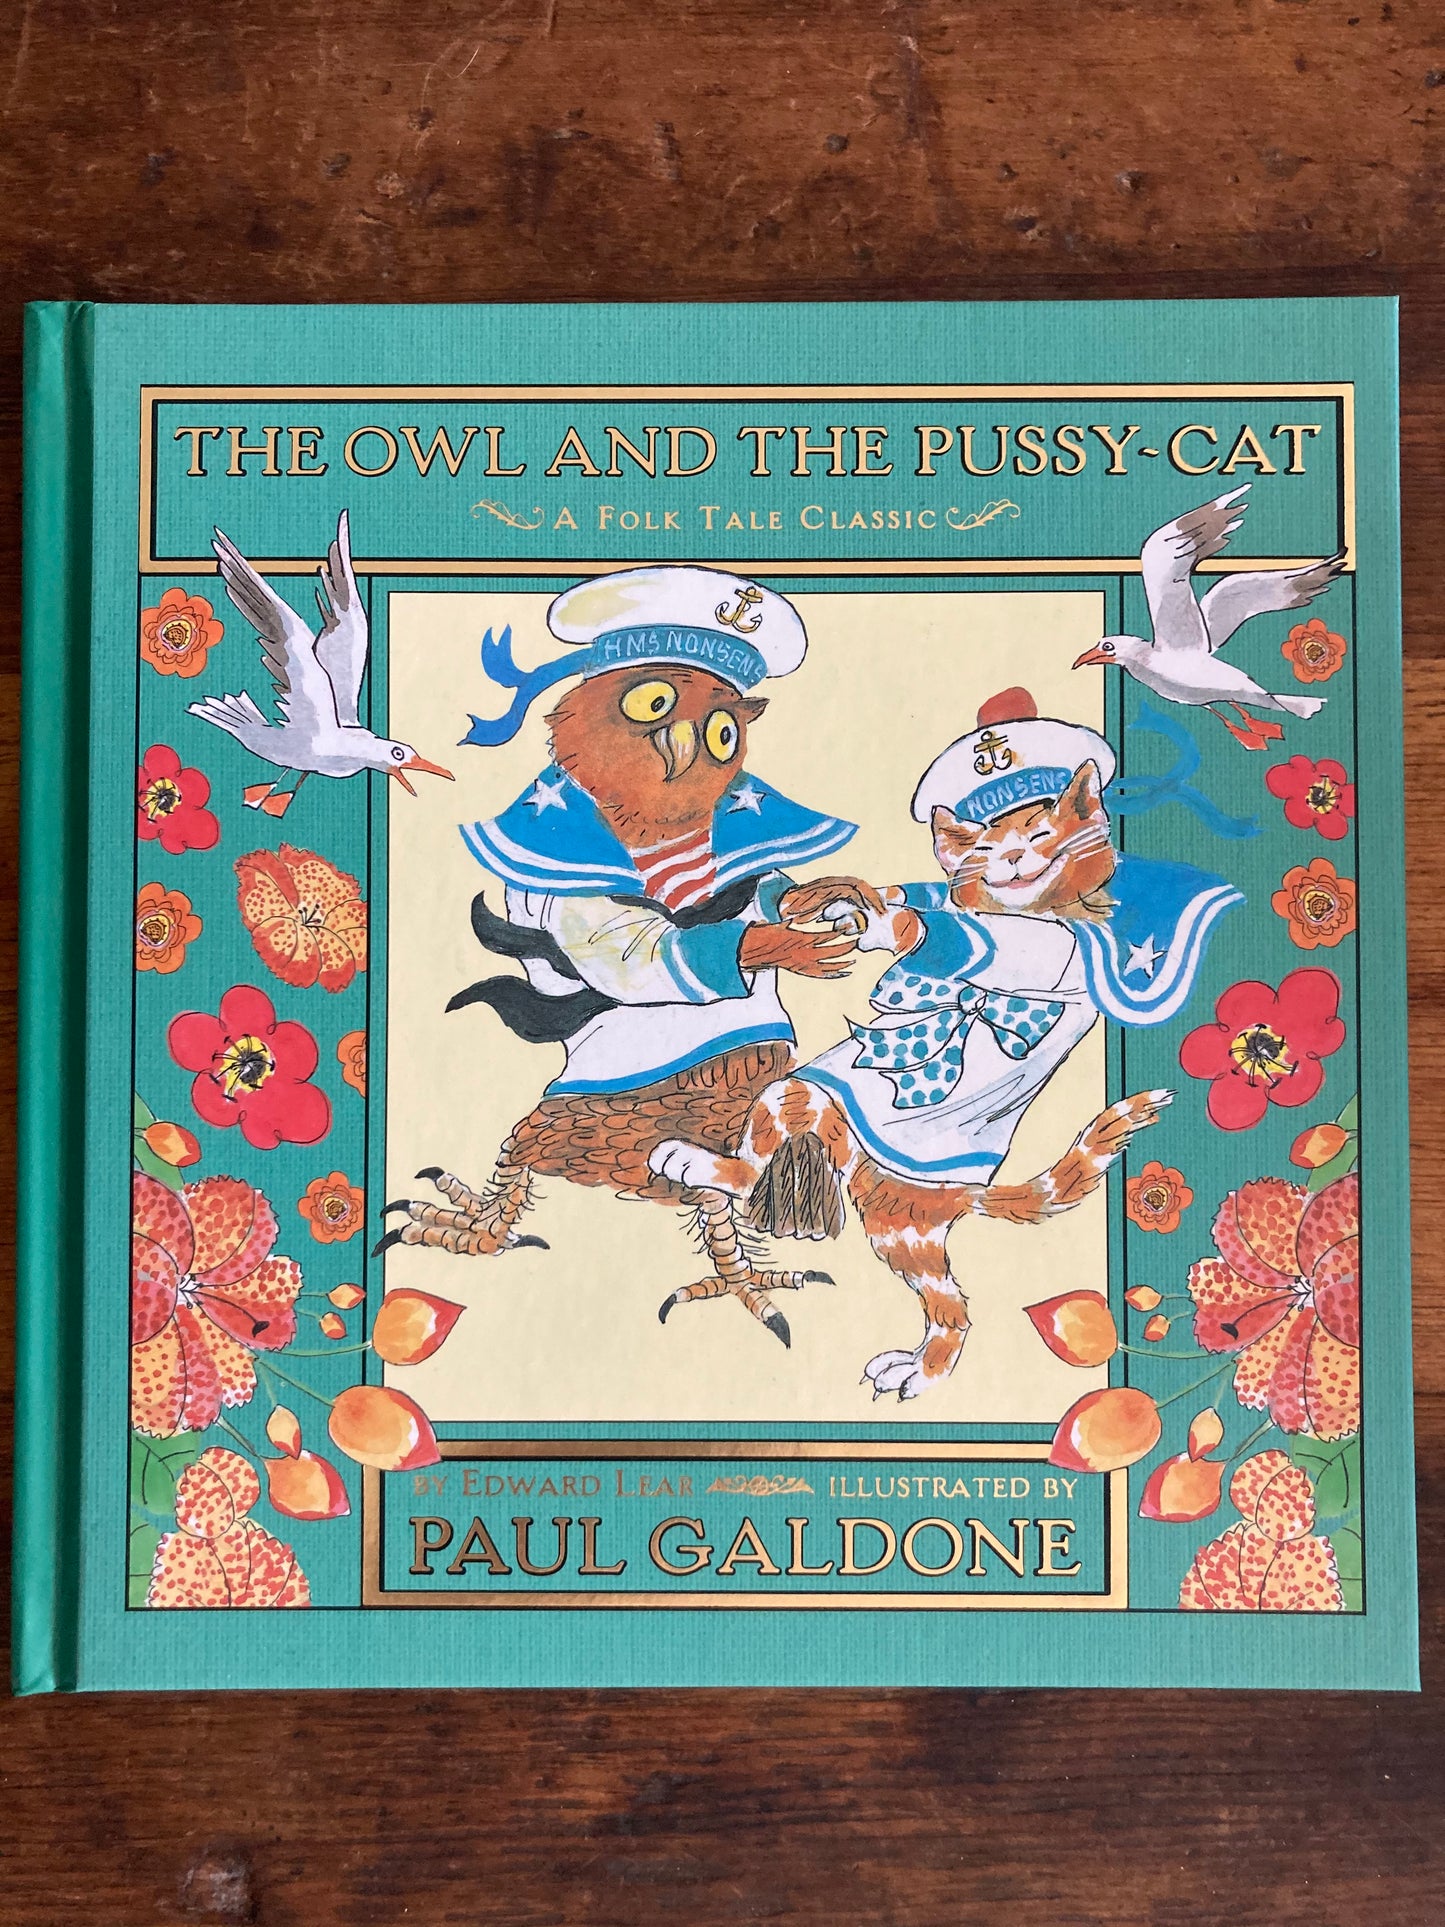 Children’s Fairy&Folk Tales - THE OWL AND THE PUSSY- CAT